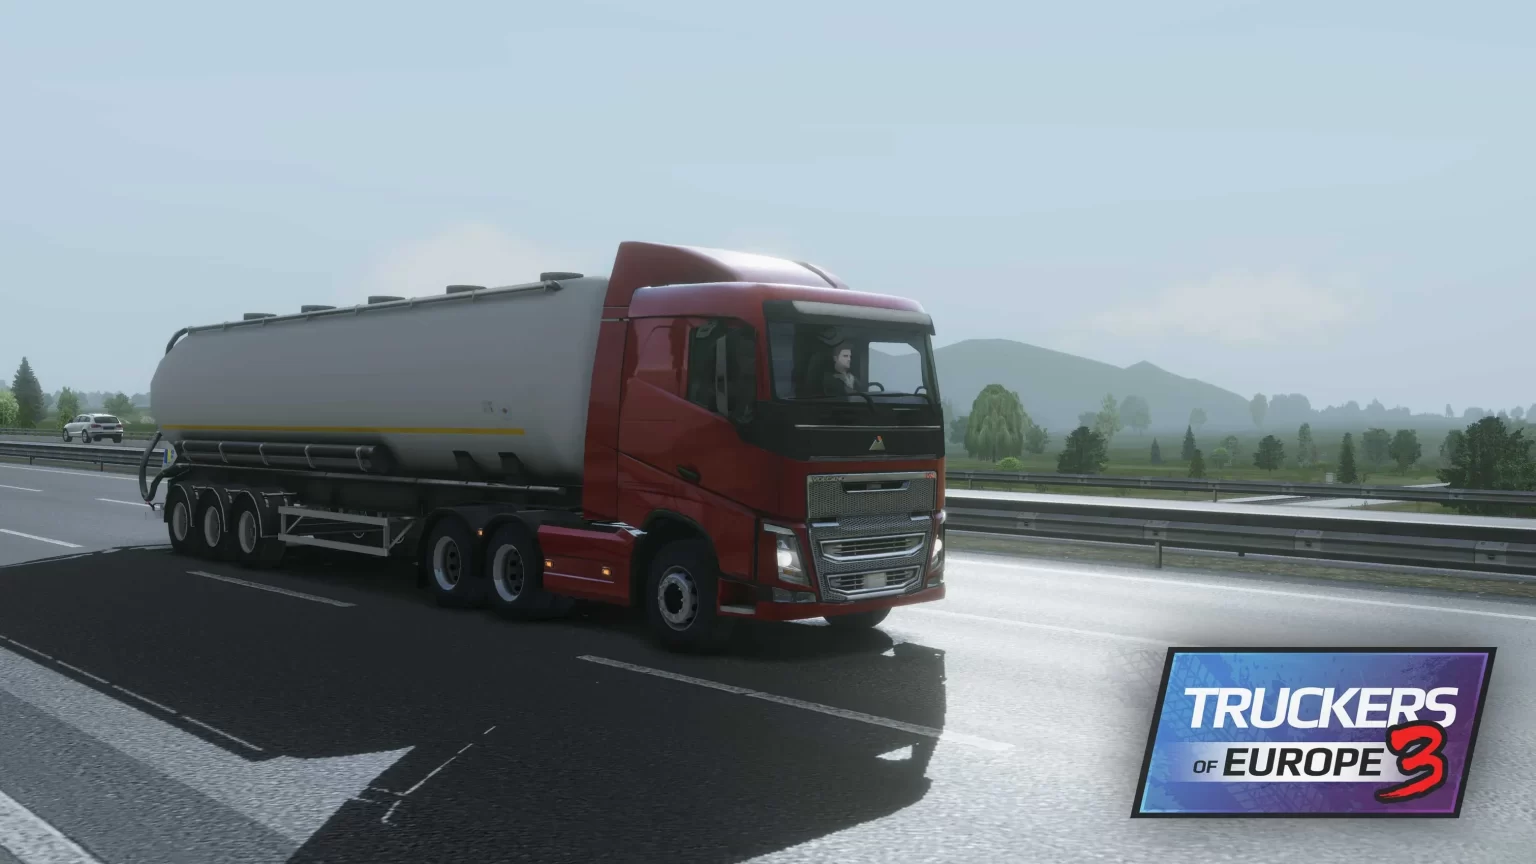 unnamed 27 1 1536x864 - Truckers of Europe 3 Mod Apk V0.36.2 (Unlimited Money)